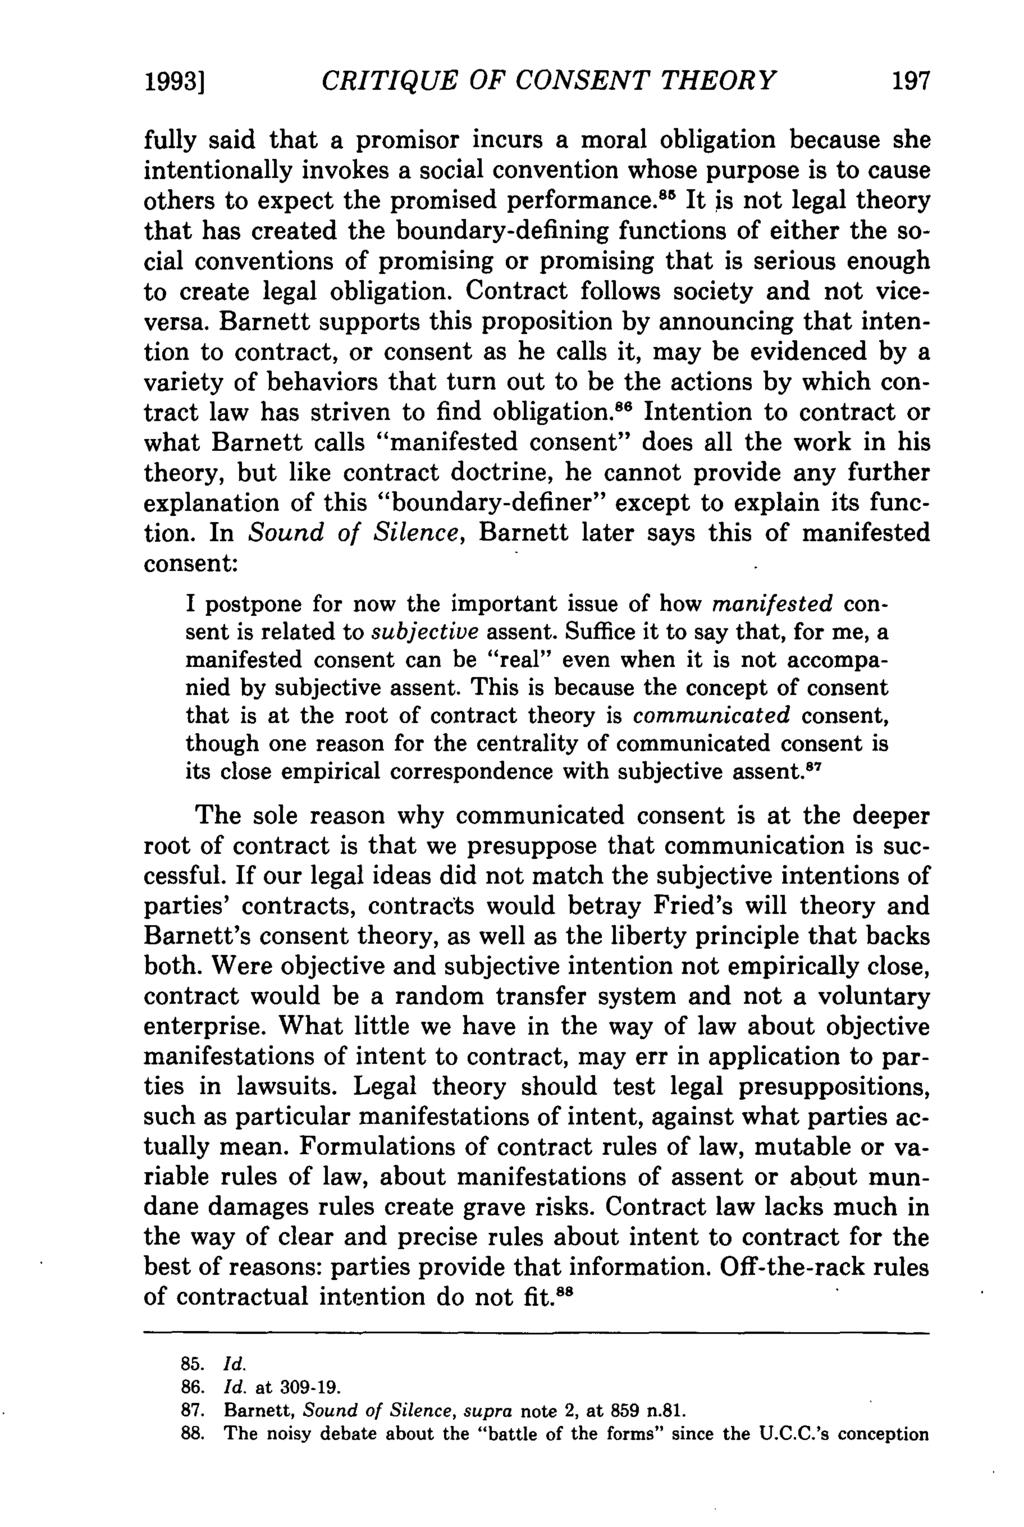 Kalevitch: Gaps in Contracts 19931 CRITIQUE OF CONSENT THEORY 197 fully said that a promisor incurs a moral obligation because she intentionally invokes a social convention whose purpose is to cause